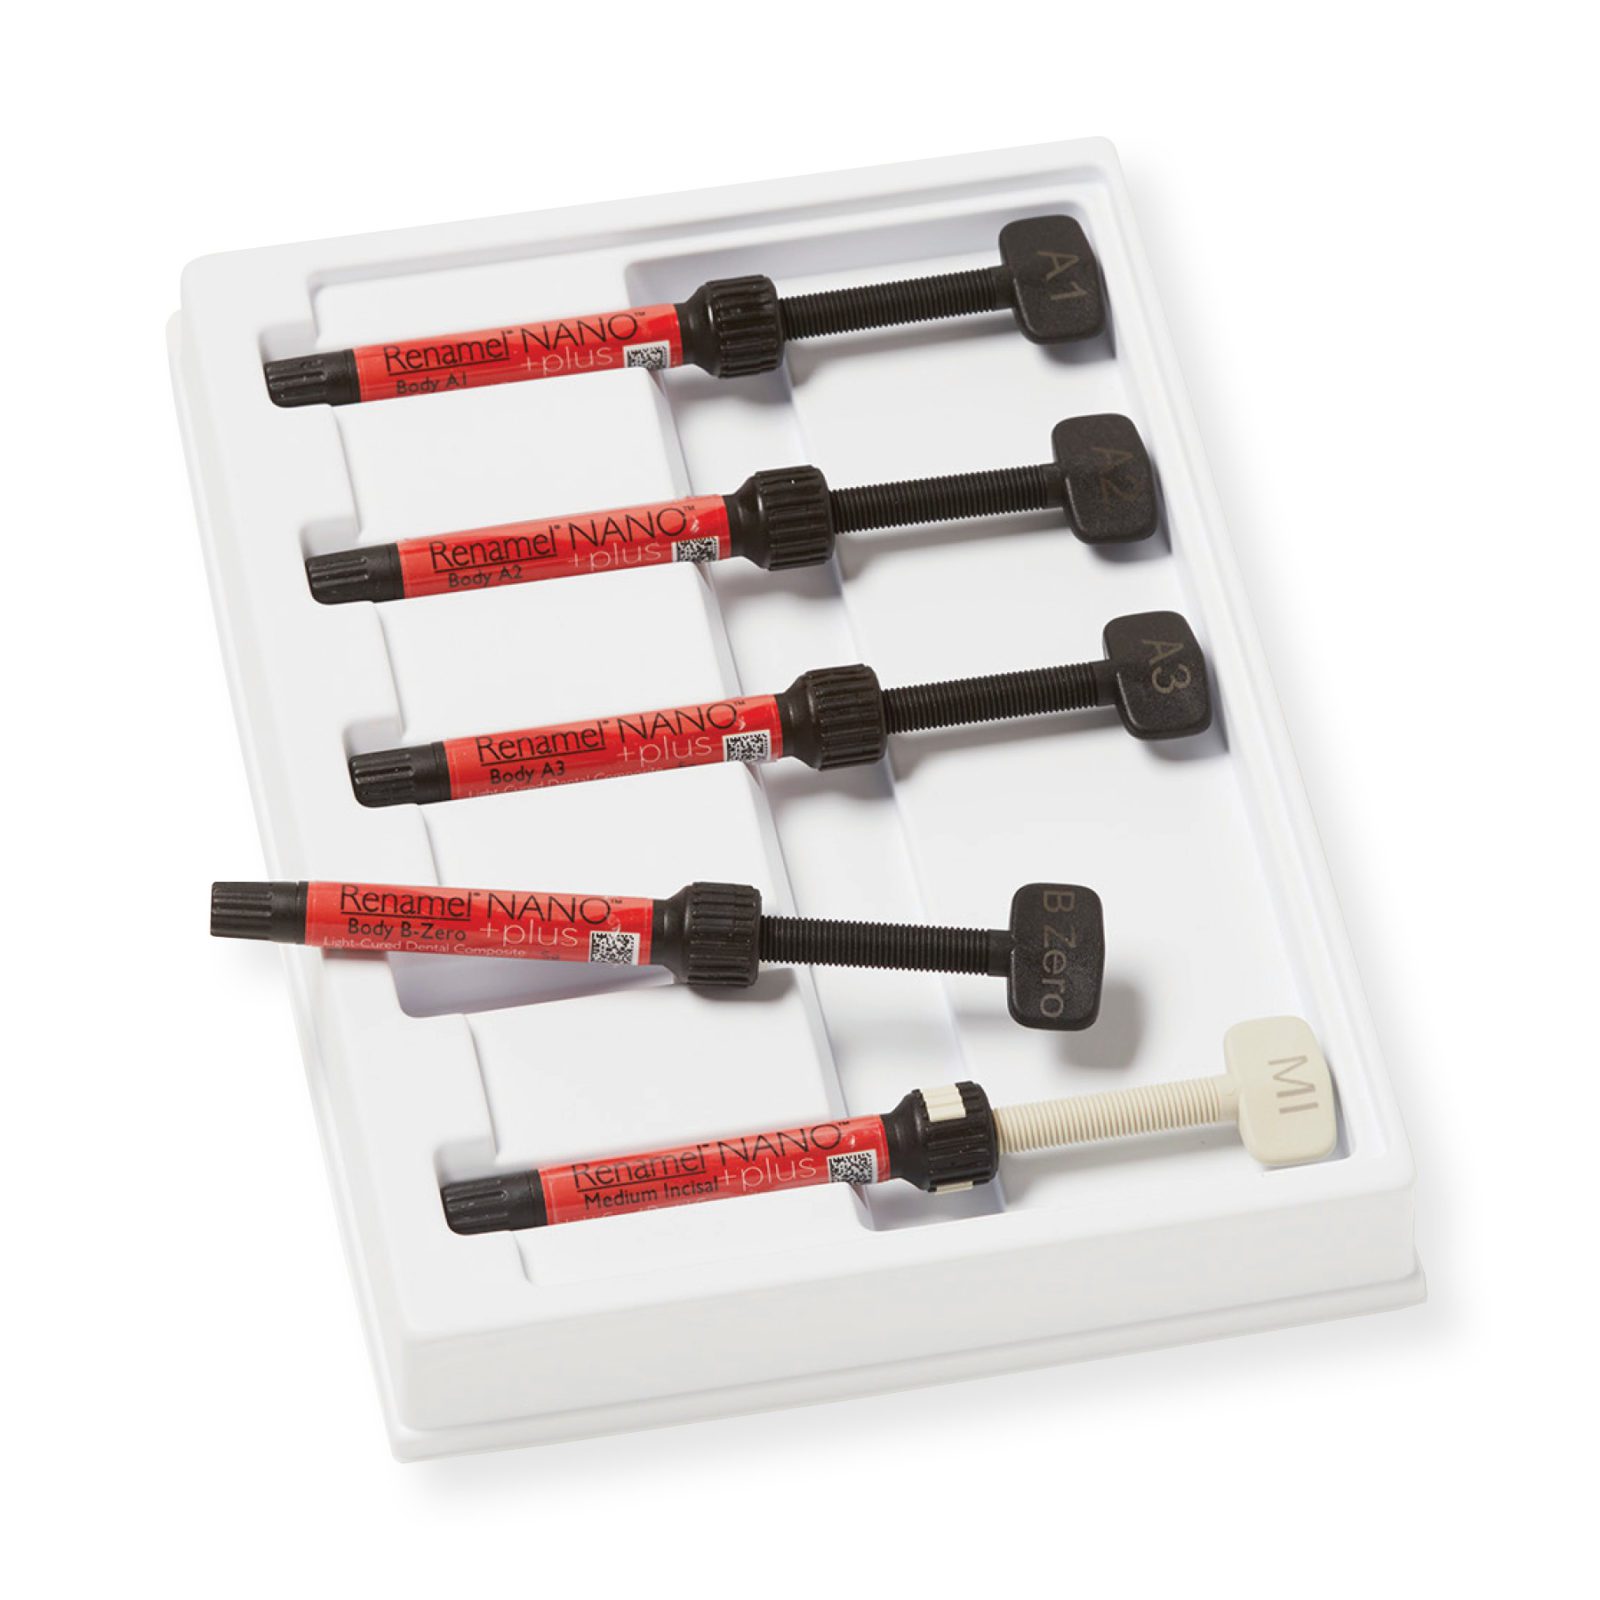 New Porcelain Repair Kit from Cosmedent